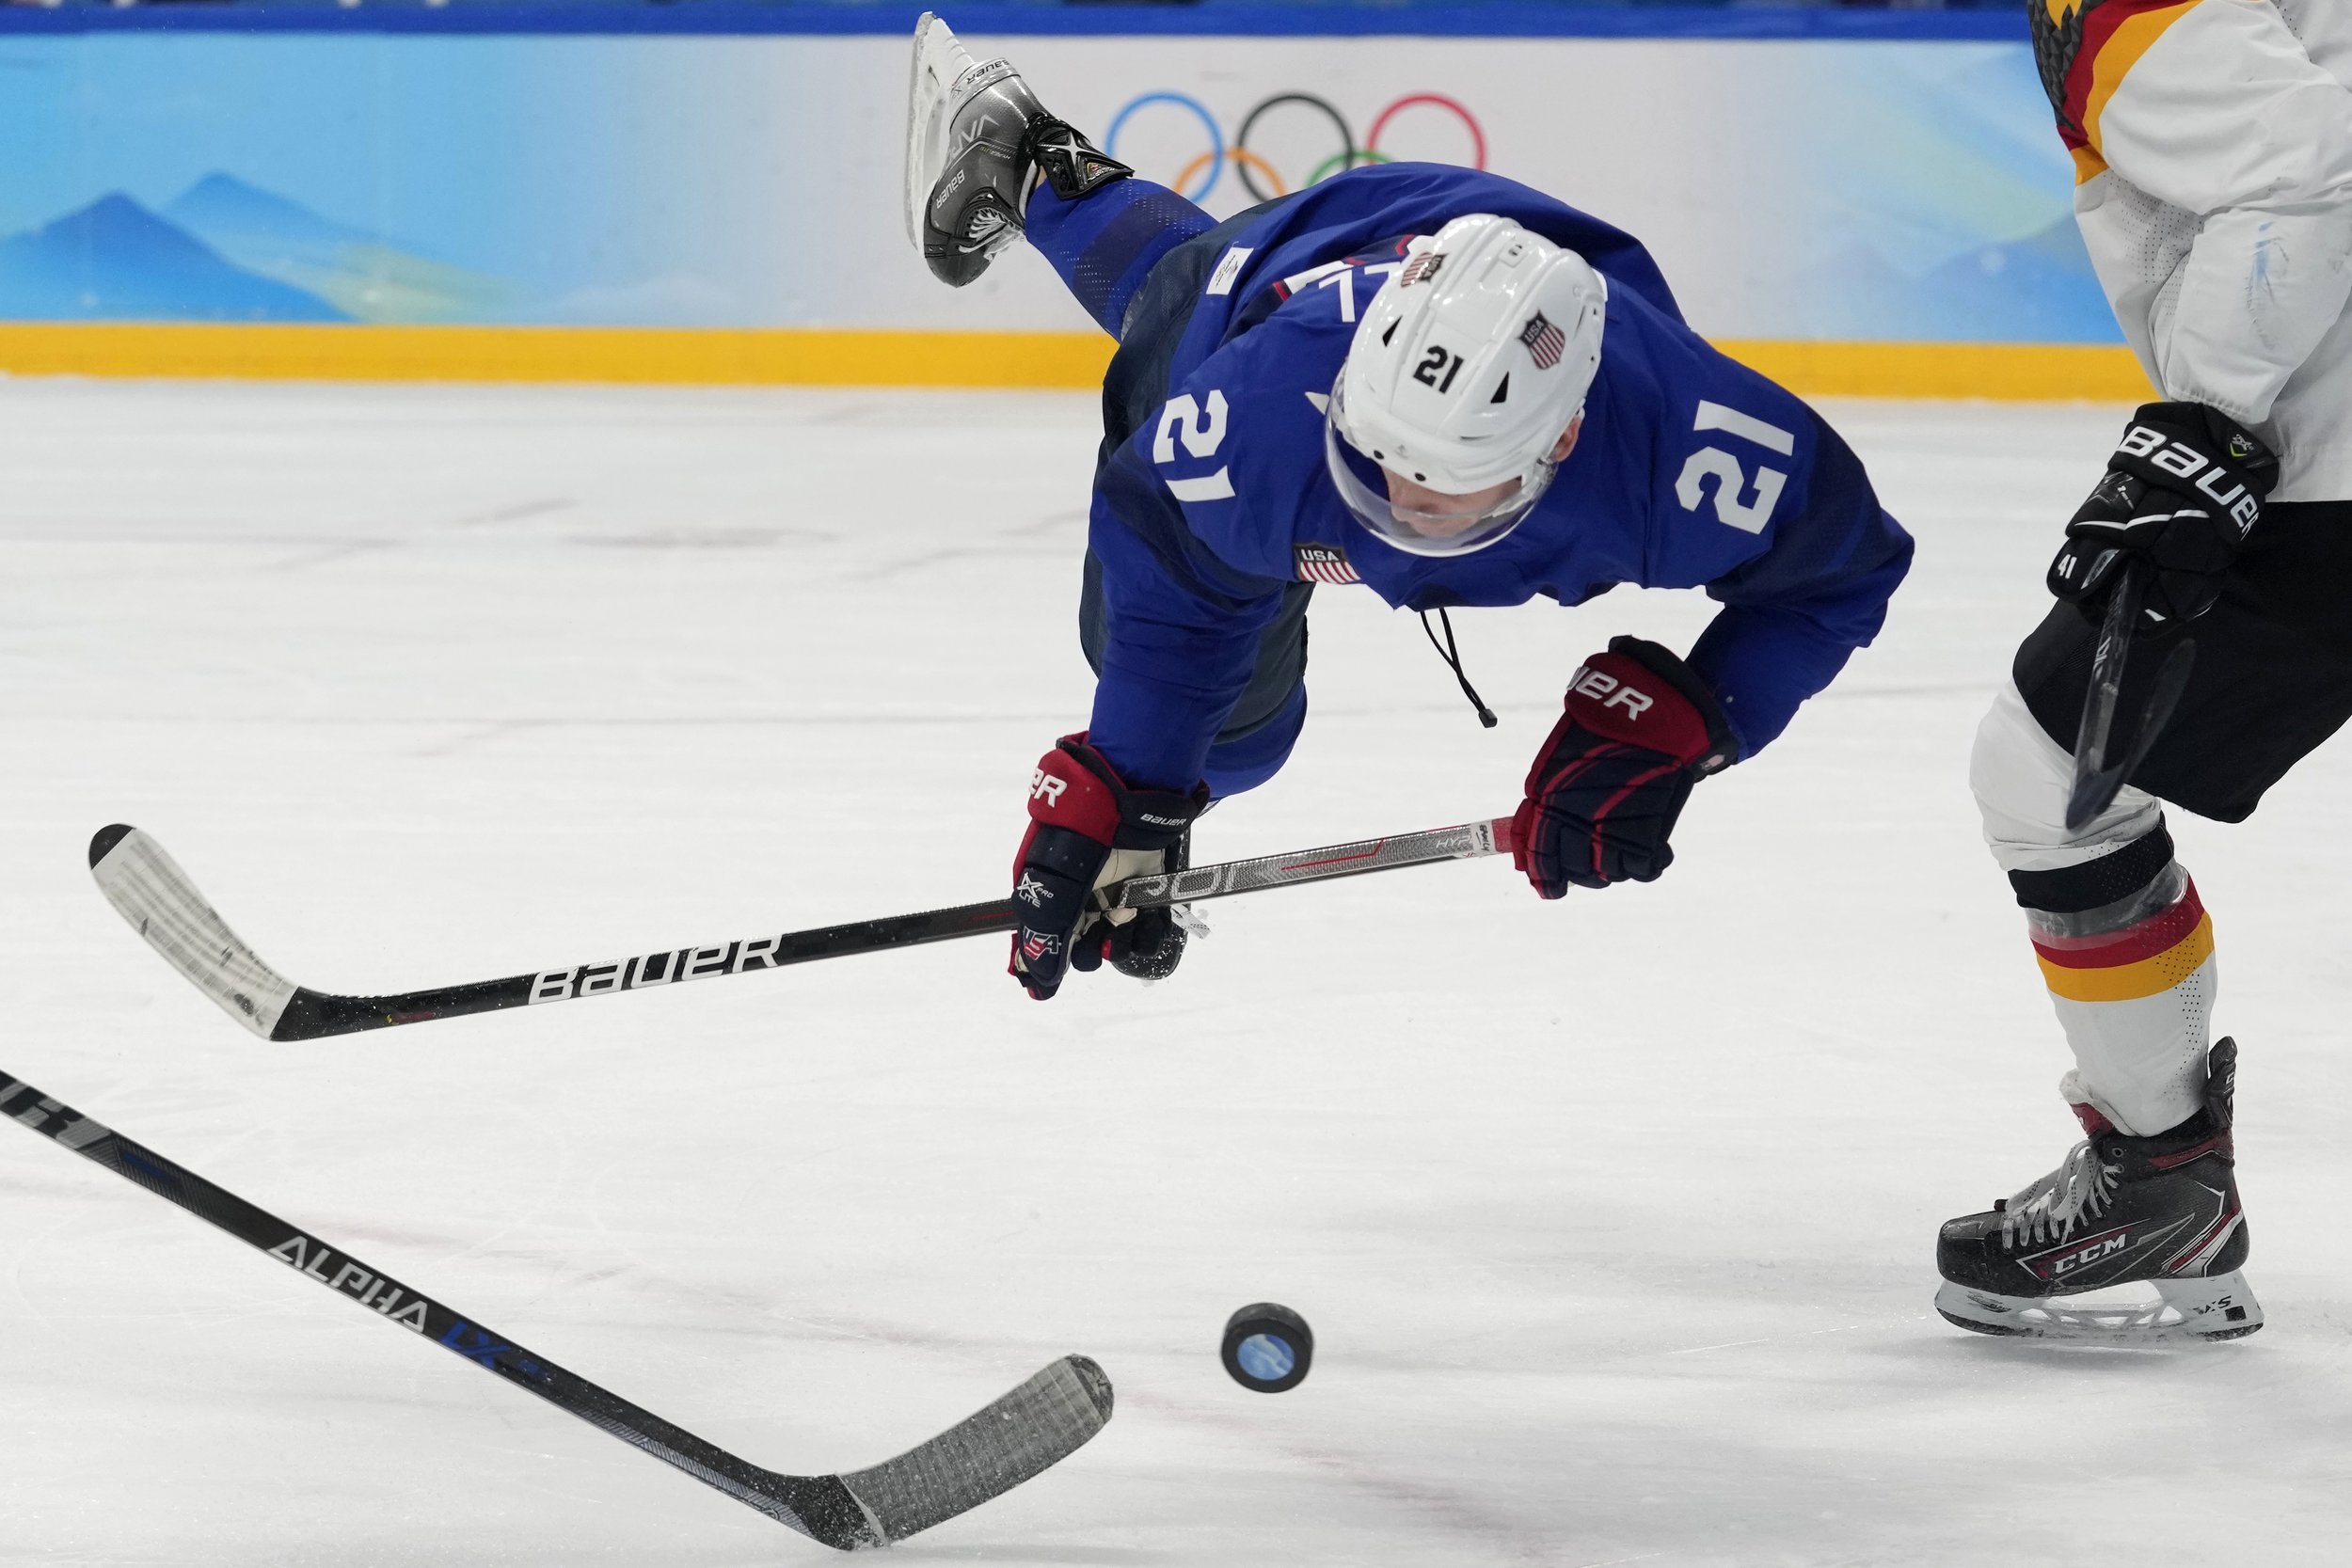  United States' Brian O'Neill falls as he goes for the puck during a preliminary round men's hockey game against Germany at the 2022 Winter Olympics, Sunday, Feb. 13, 2022, in Beijing. (AP Photo/Petr David Josek) 